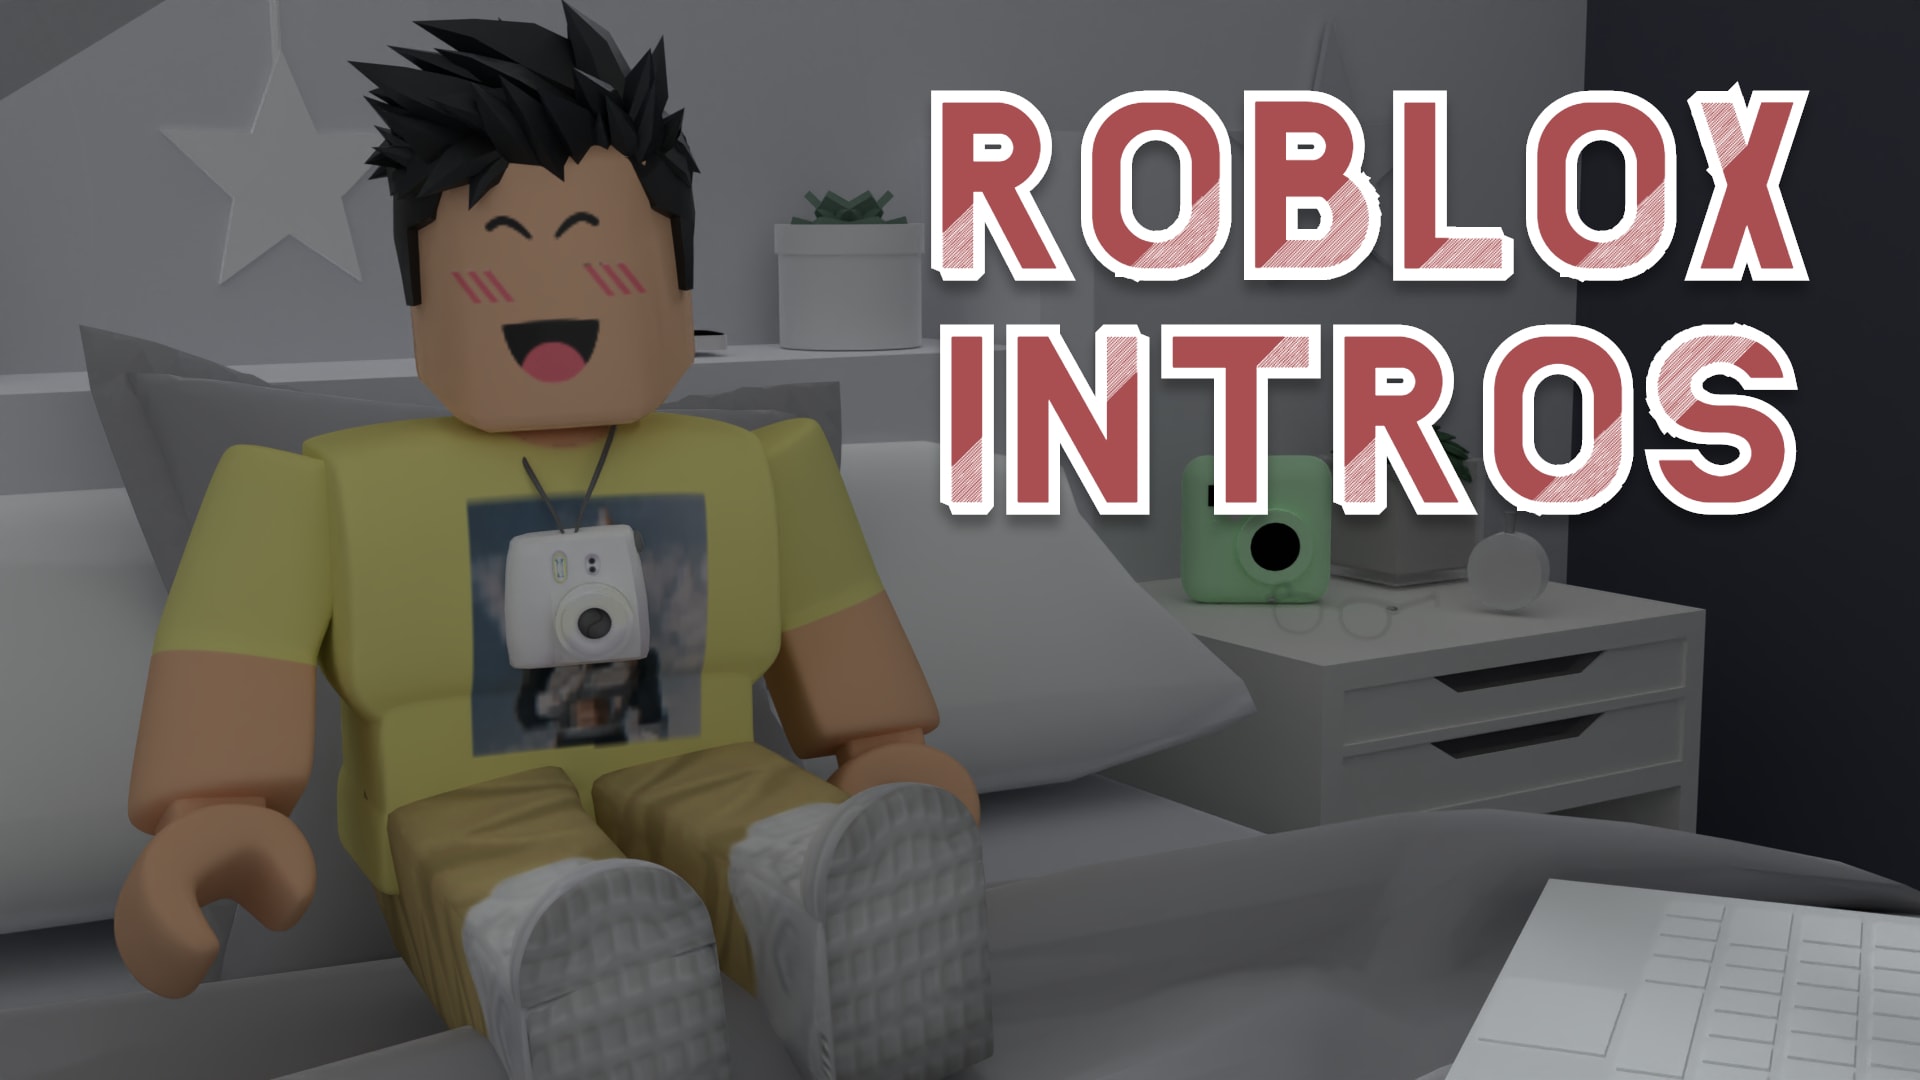 Create A Roblox Animated Intro For Your Yt Channel By Mcs Roblox - aesthetic roblox intro background